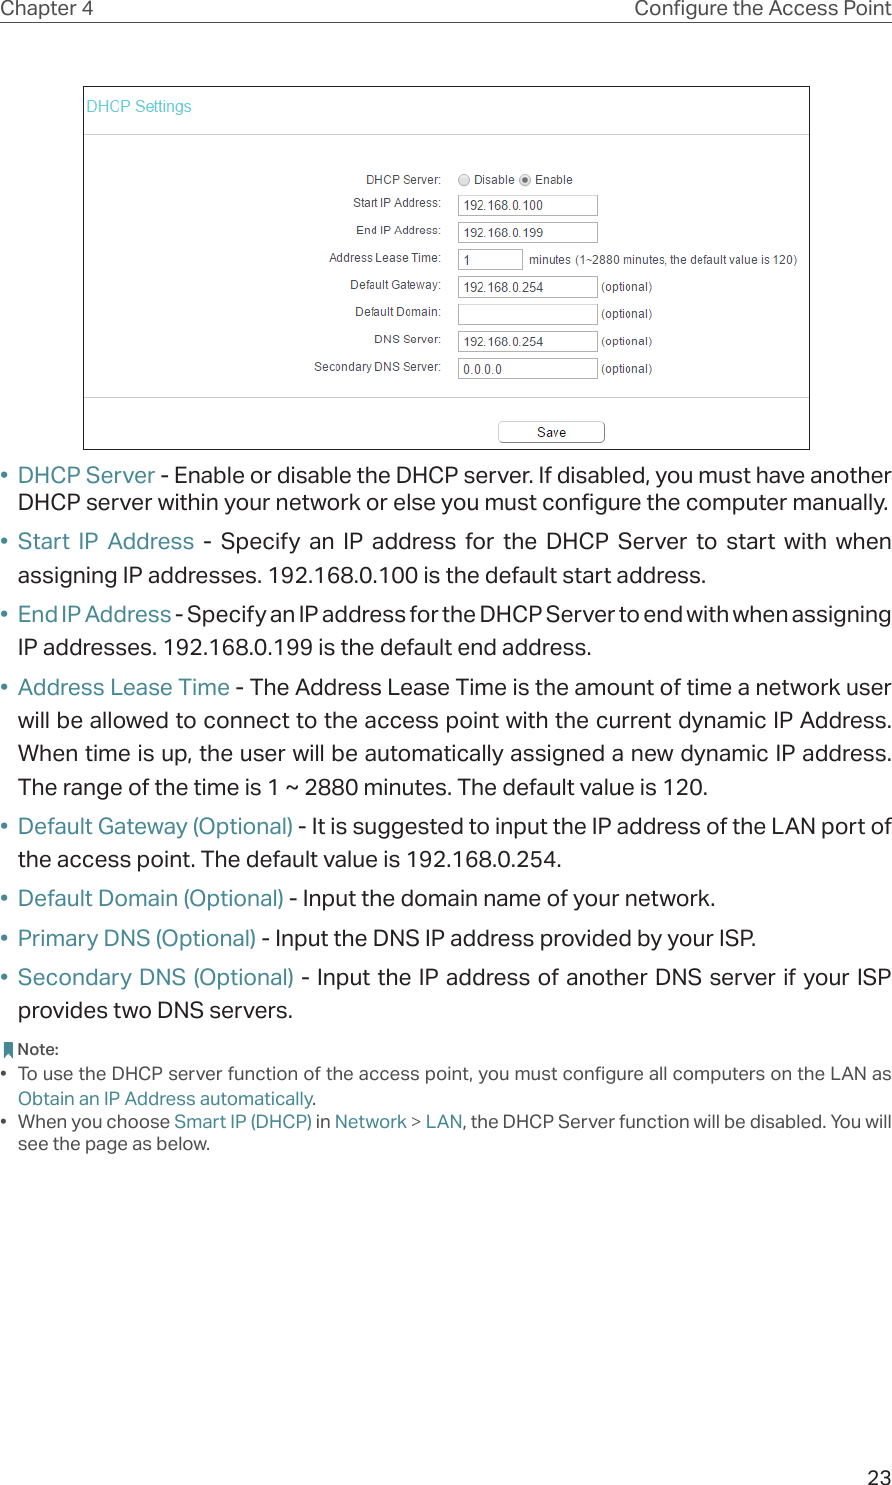 23Chapter 4 Congure the Access Point•  DHCP Server - Enable or disable the DHCP server. If disabled, you must have another DHCP server within your network or else you must configure the computer manually.•  Start IP Address - Specify an IP address for the DHCP Server to start with when assigning IP addresses. 192.168.0.100 is the default start address.•  End IP Address - Specify an IP address for the DHCP Server to end with when assigning IP addresses. 192.168.0.199 is the default end address.•  Address Lease Time - The Address Lease Time is the amount of time a network user will be allowed to connect to the access point with the current dynamic IP Address. When time is up, the user will be automatically assigned a new dynamic IP address. The range of the time is 1 ~ 2880 minutes. The default value is 120.•  Default Gateway (Optional) - It is suggested to input the IP address of the LAN port of the access point. The default value is 192.168.0.254.•  Default Domain (Optional) - Input the domain name of your network.•  Primary DNS (Optional) - Input the DNS IP address provided by your ISP.•  Secondary DNS (Optional) - Input the IP address of another DNS server if your ISP provides two DNS servers. Note:•  To use the DHCP server function of the access point, you must configure all computers on the LAN as Obtain an IP Address automatically.•  When you choose Smart IP (DHCP) in Network &gt; LAN, the DHCP Server function will be disabled. You will see the page as below.